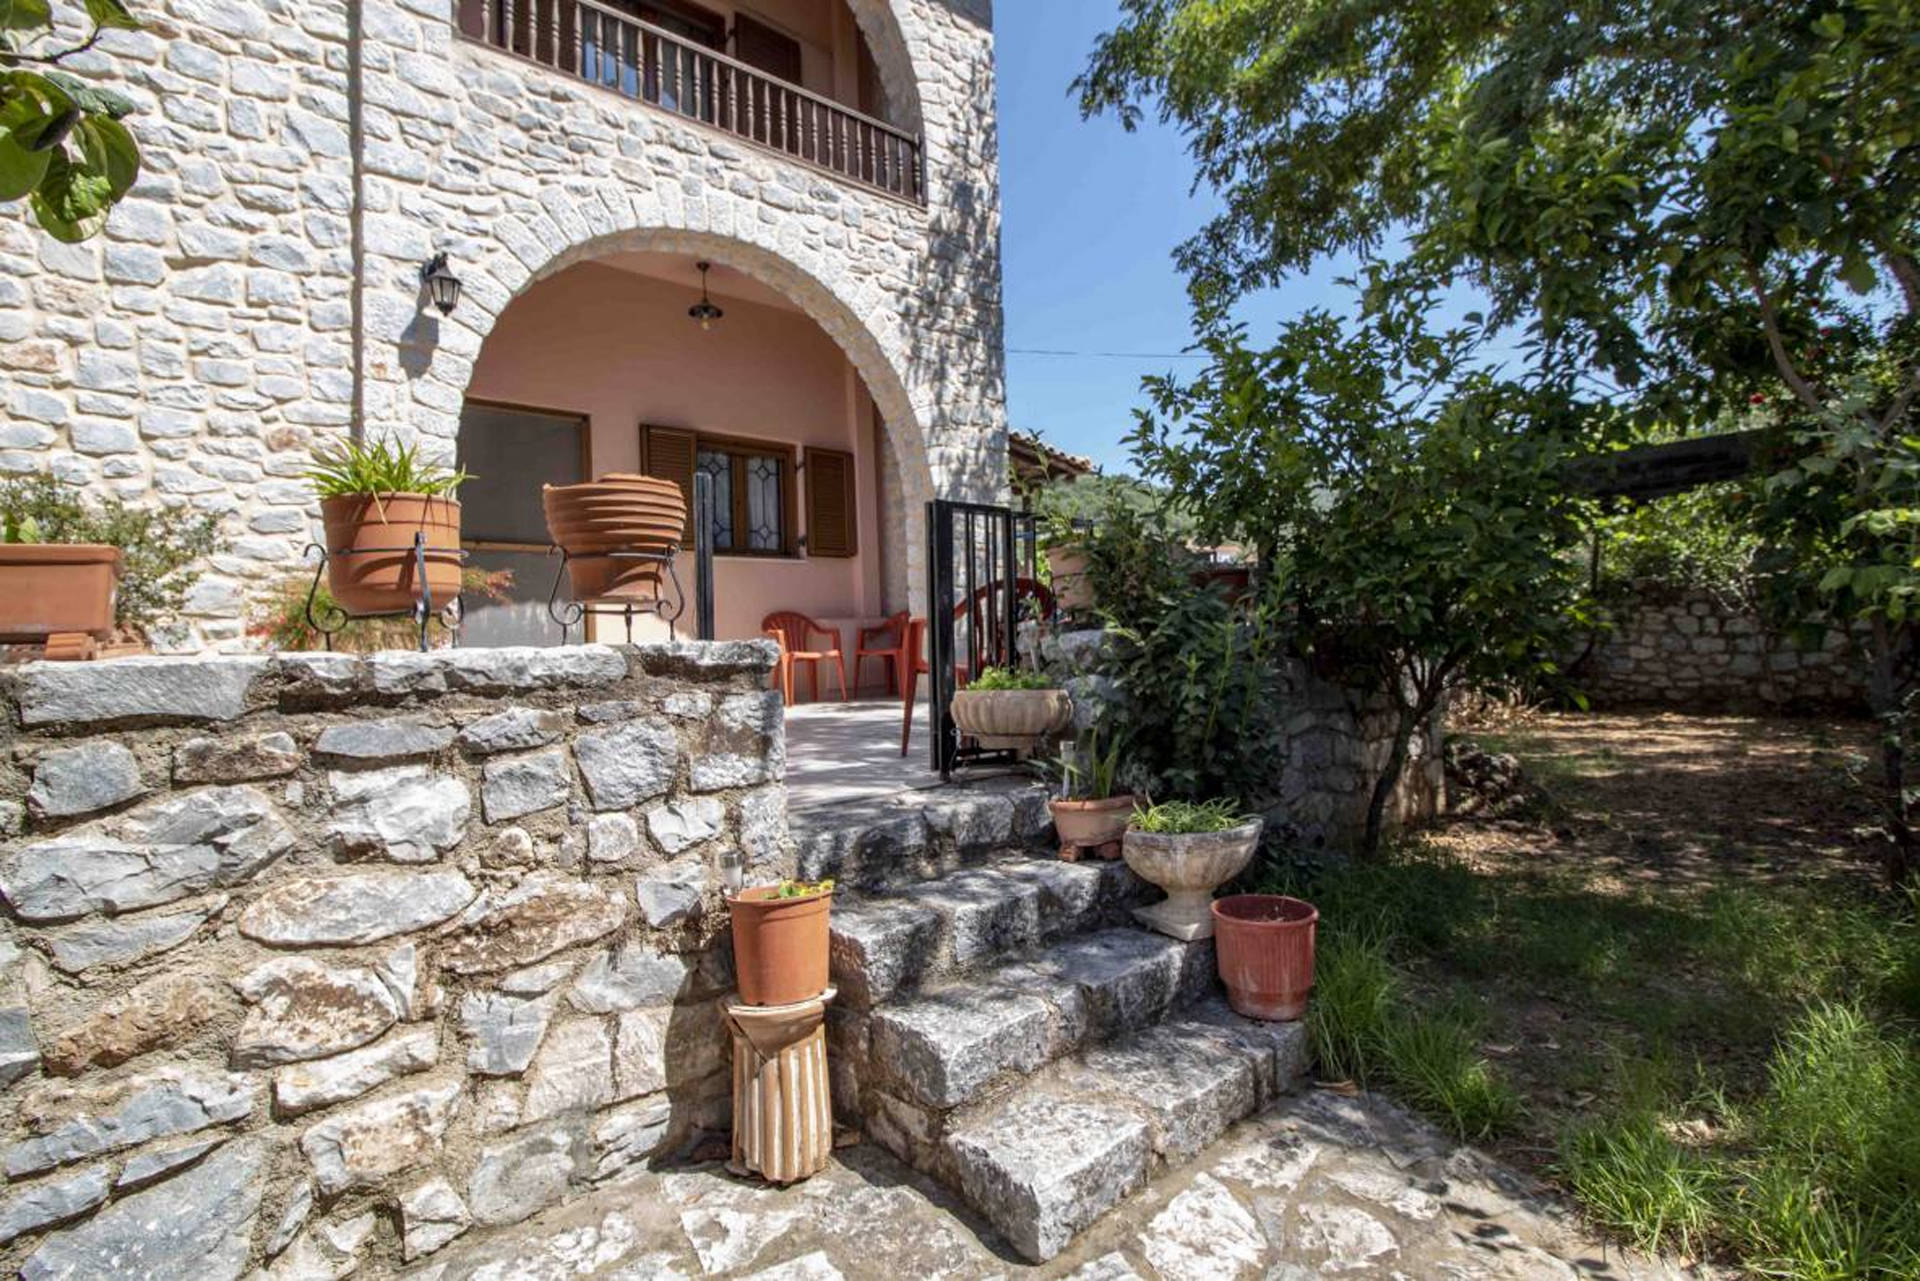 Detached country house of natural stone in Mani - HaKAR758